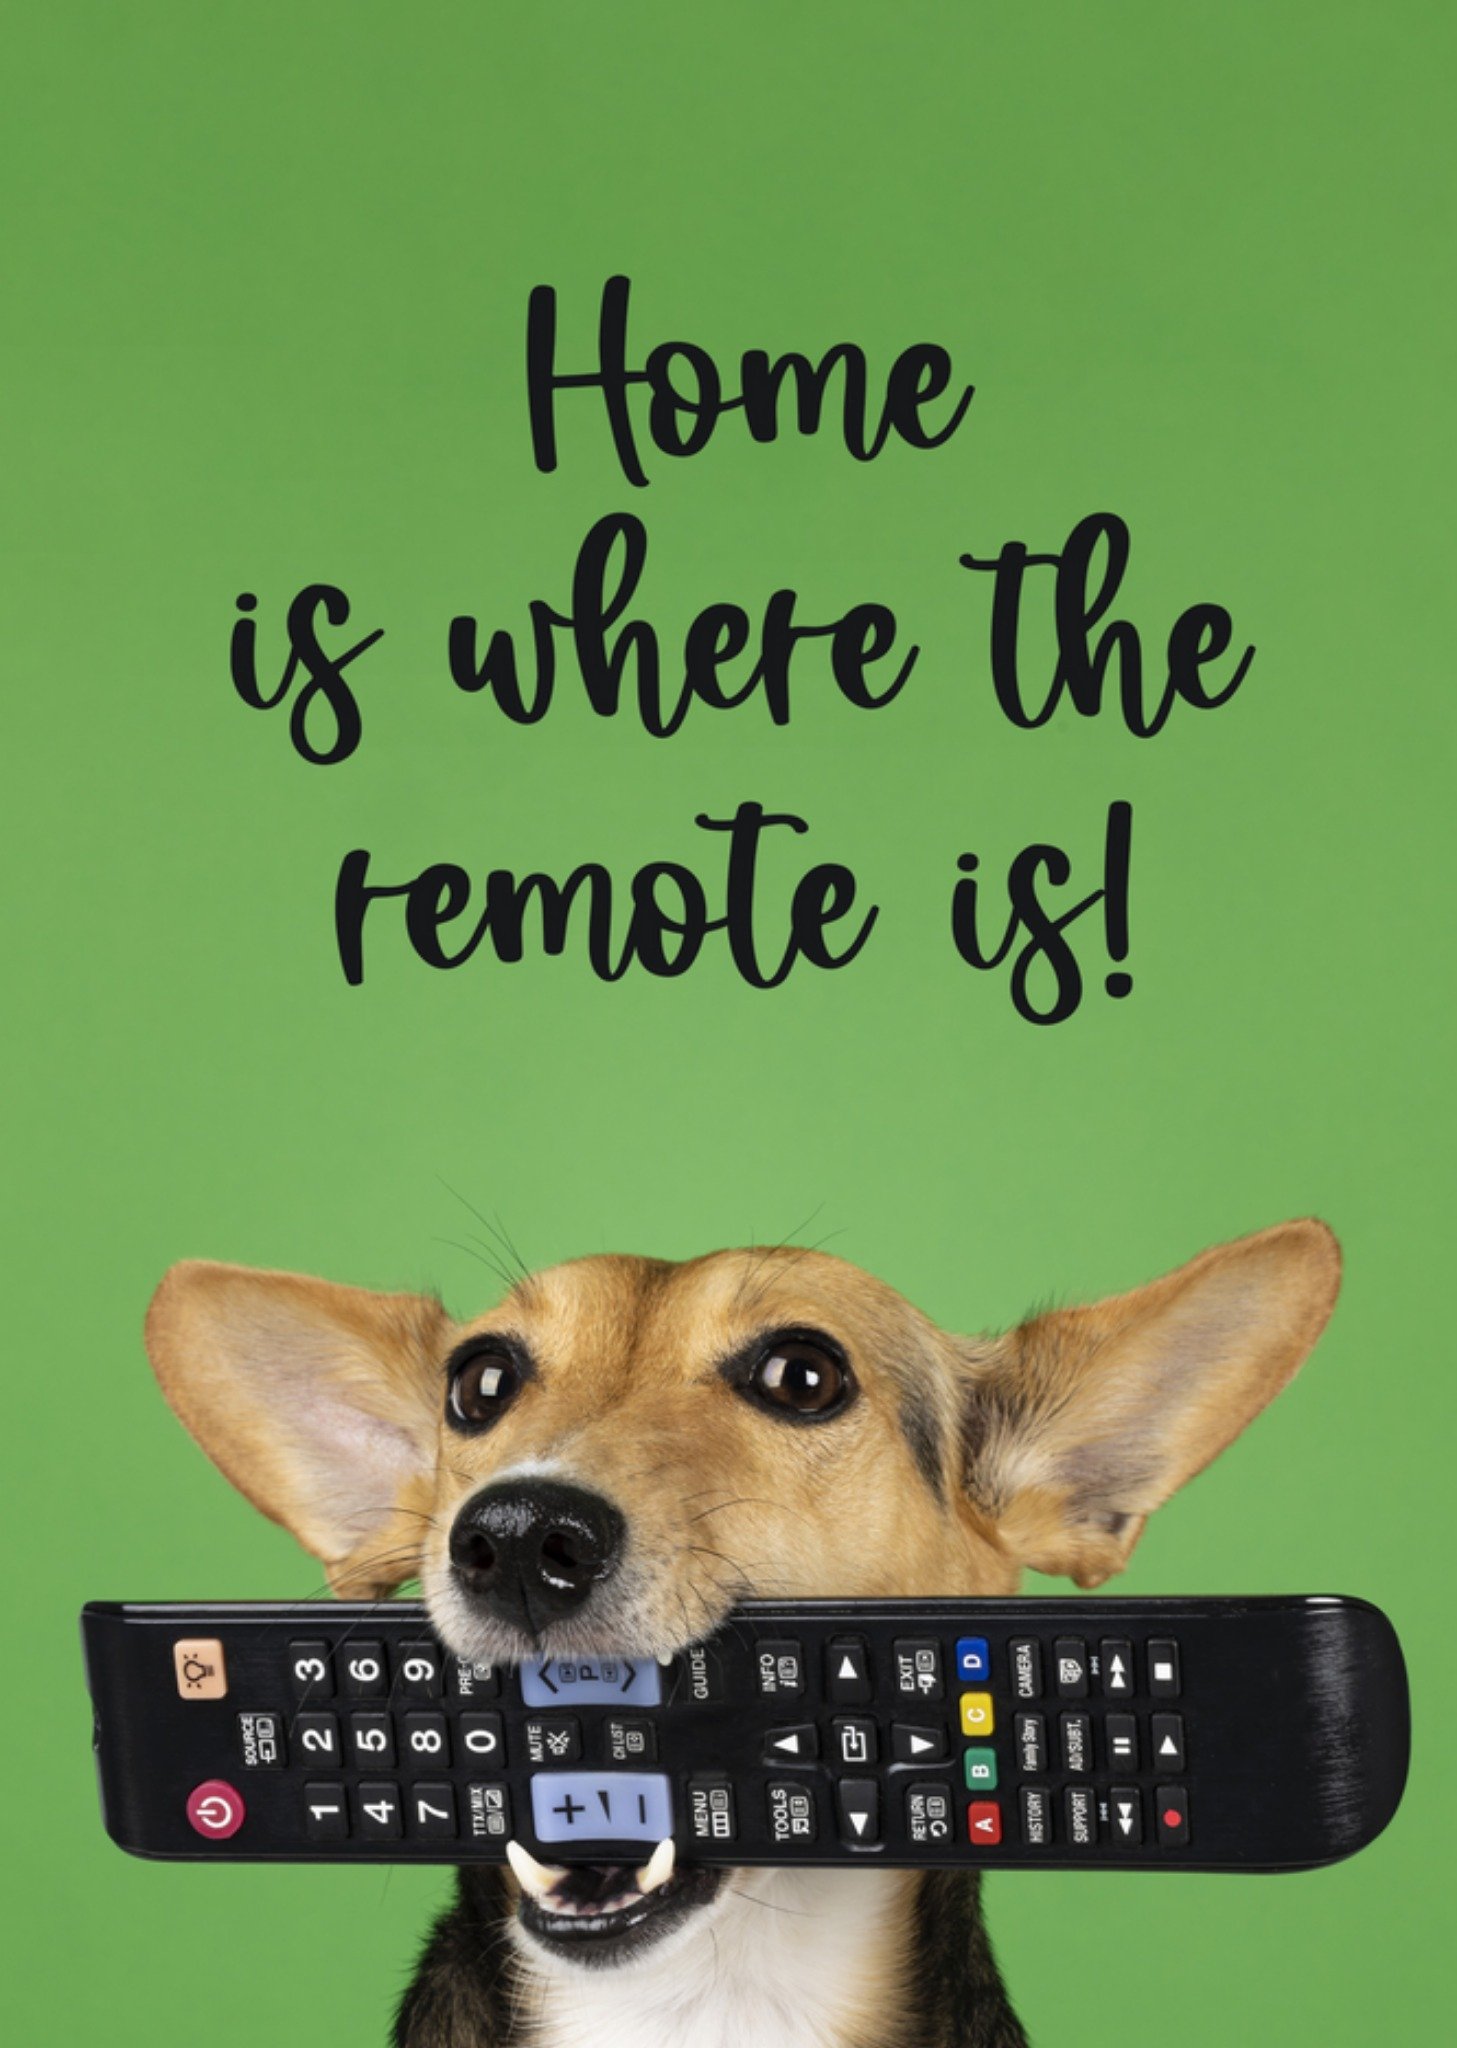 Catchy Images - Nieuwe Woning kaart - home is where the remote is - hond